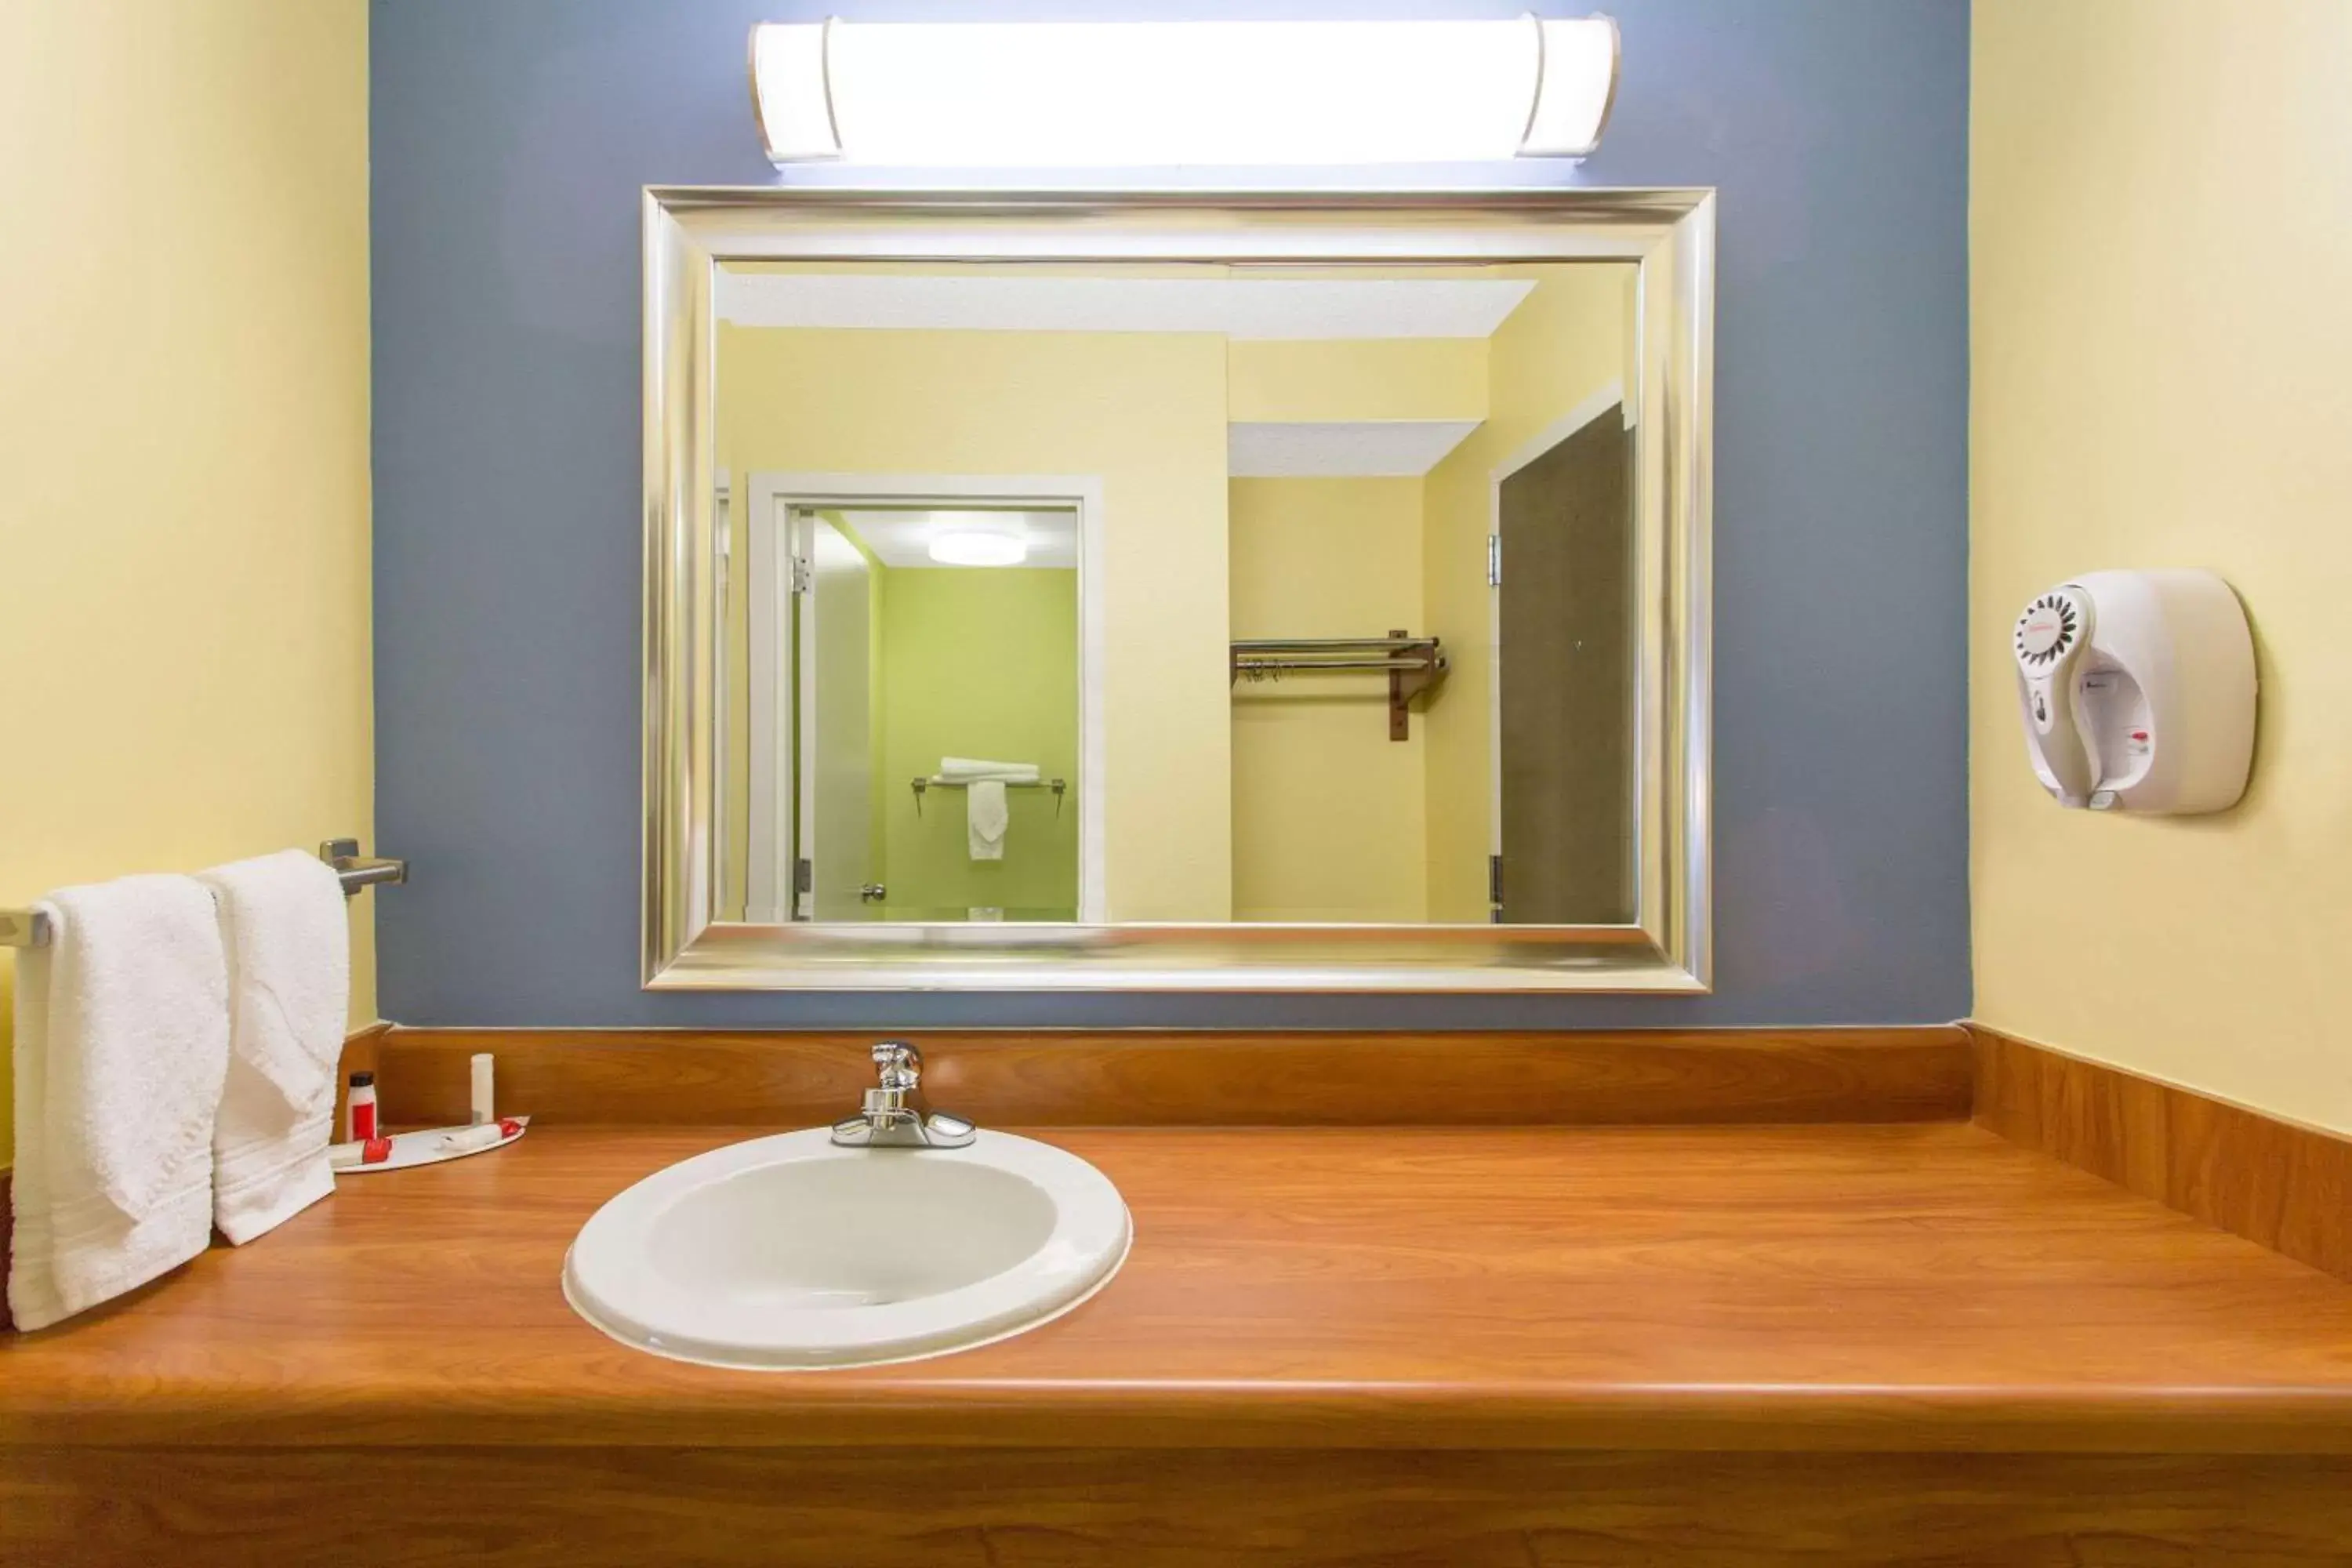 Bathroom in Days Inn by Wyndham Raleigh-Airport-Research Triangle Park